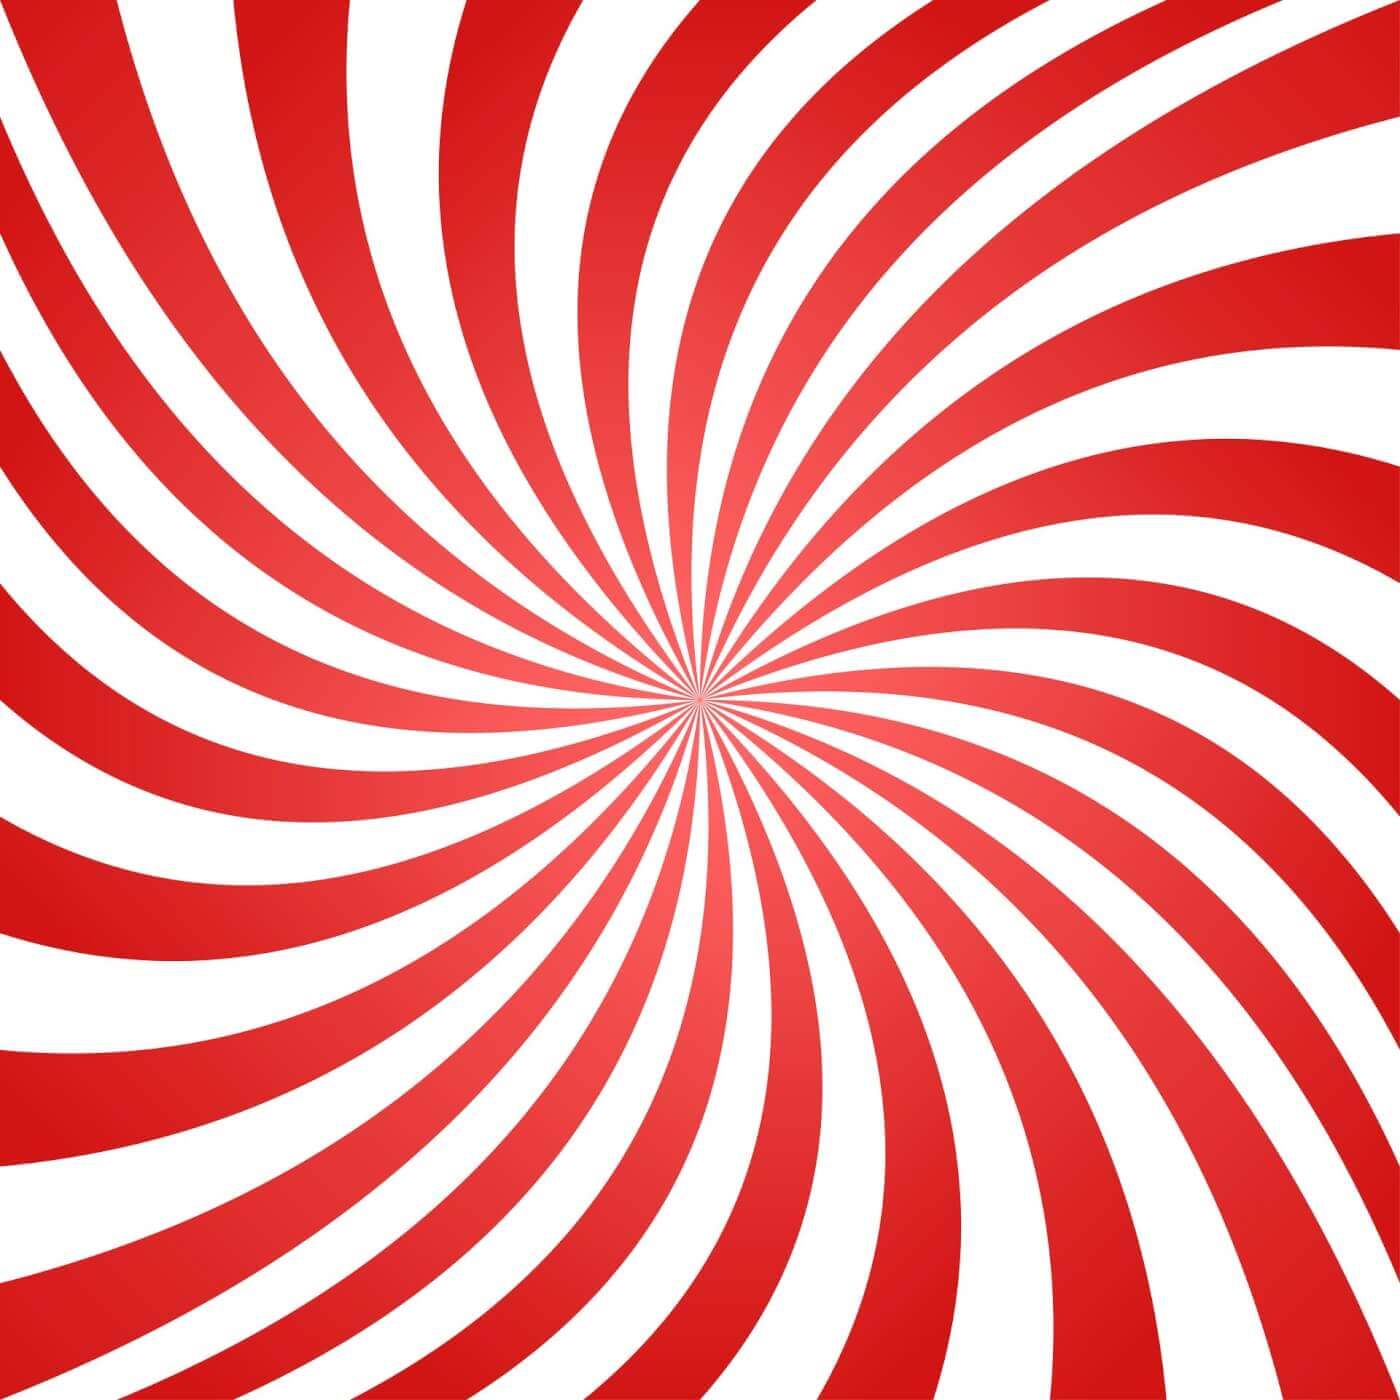 A circus red and white swirl background